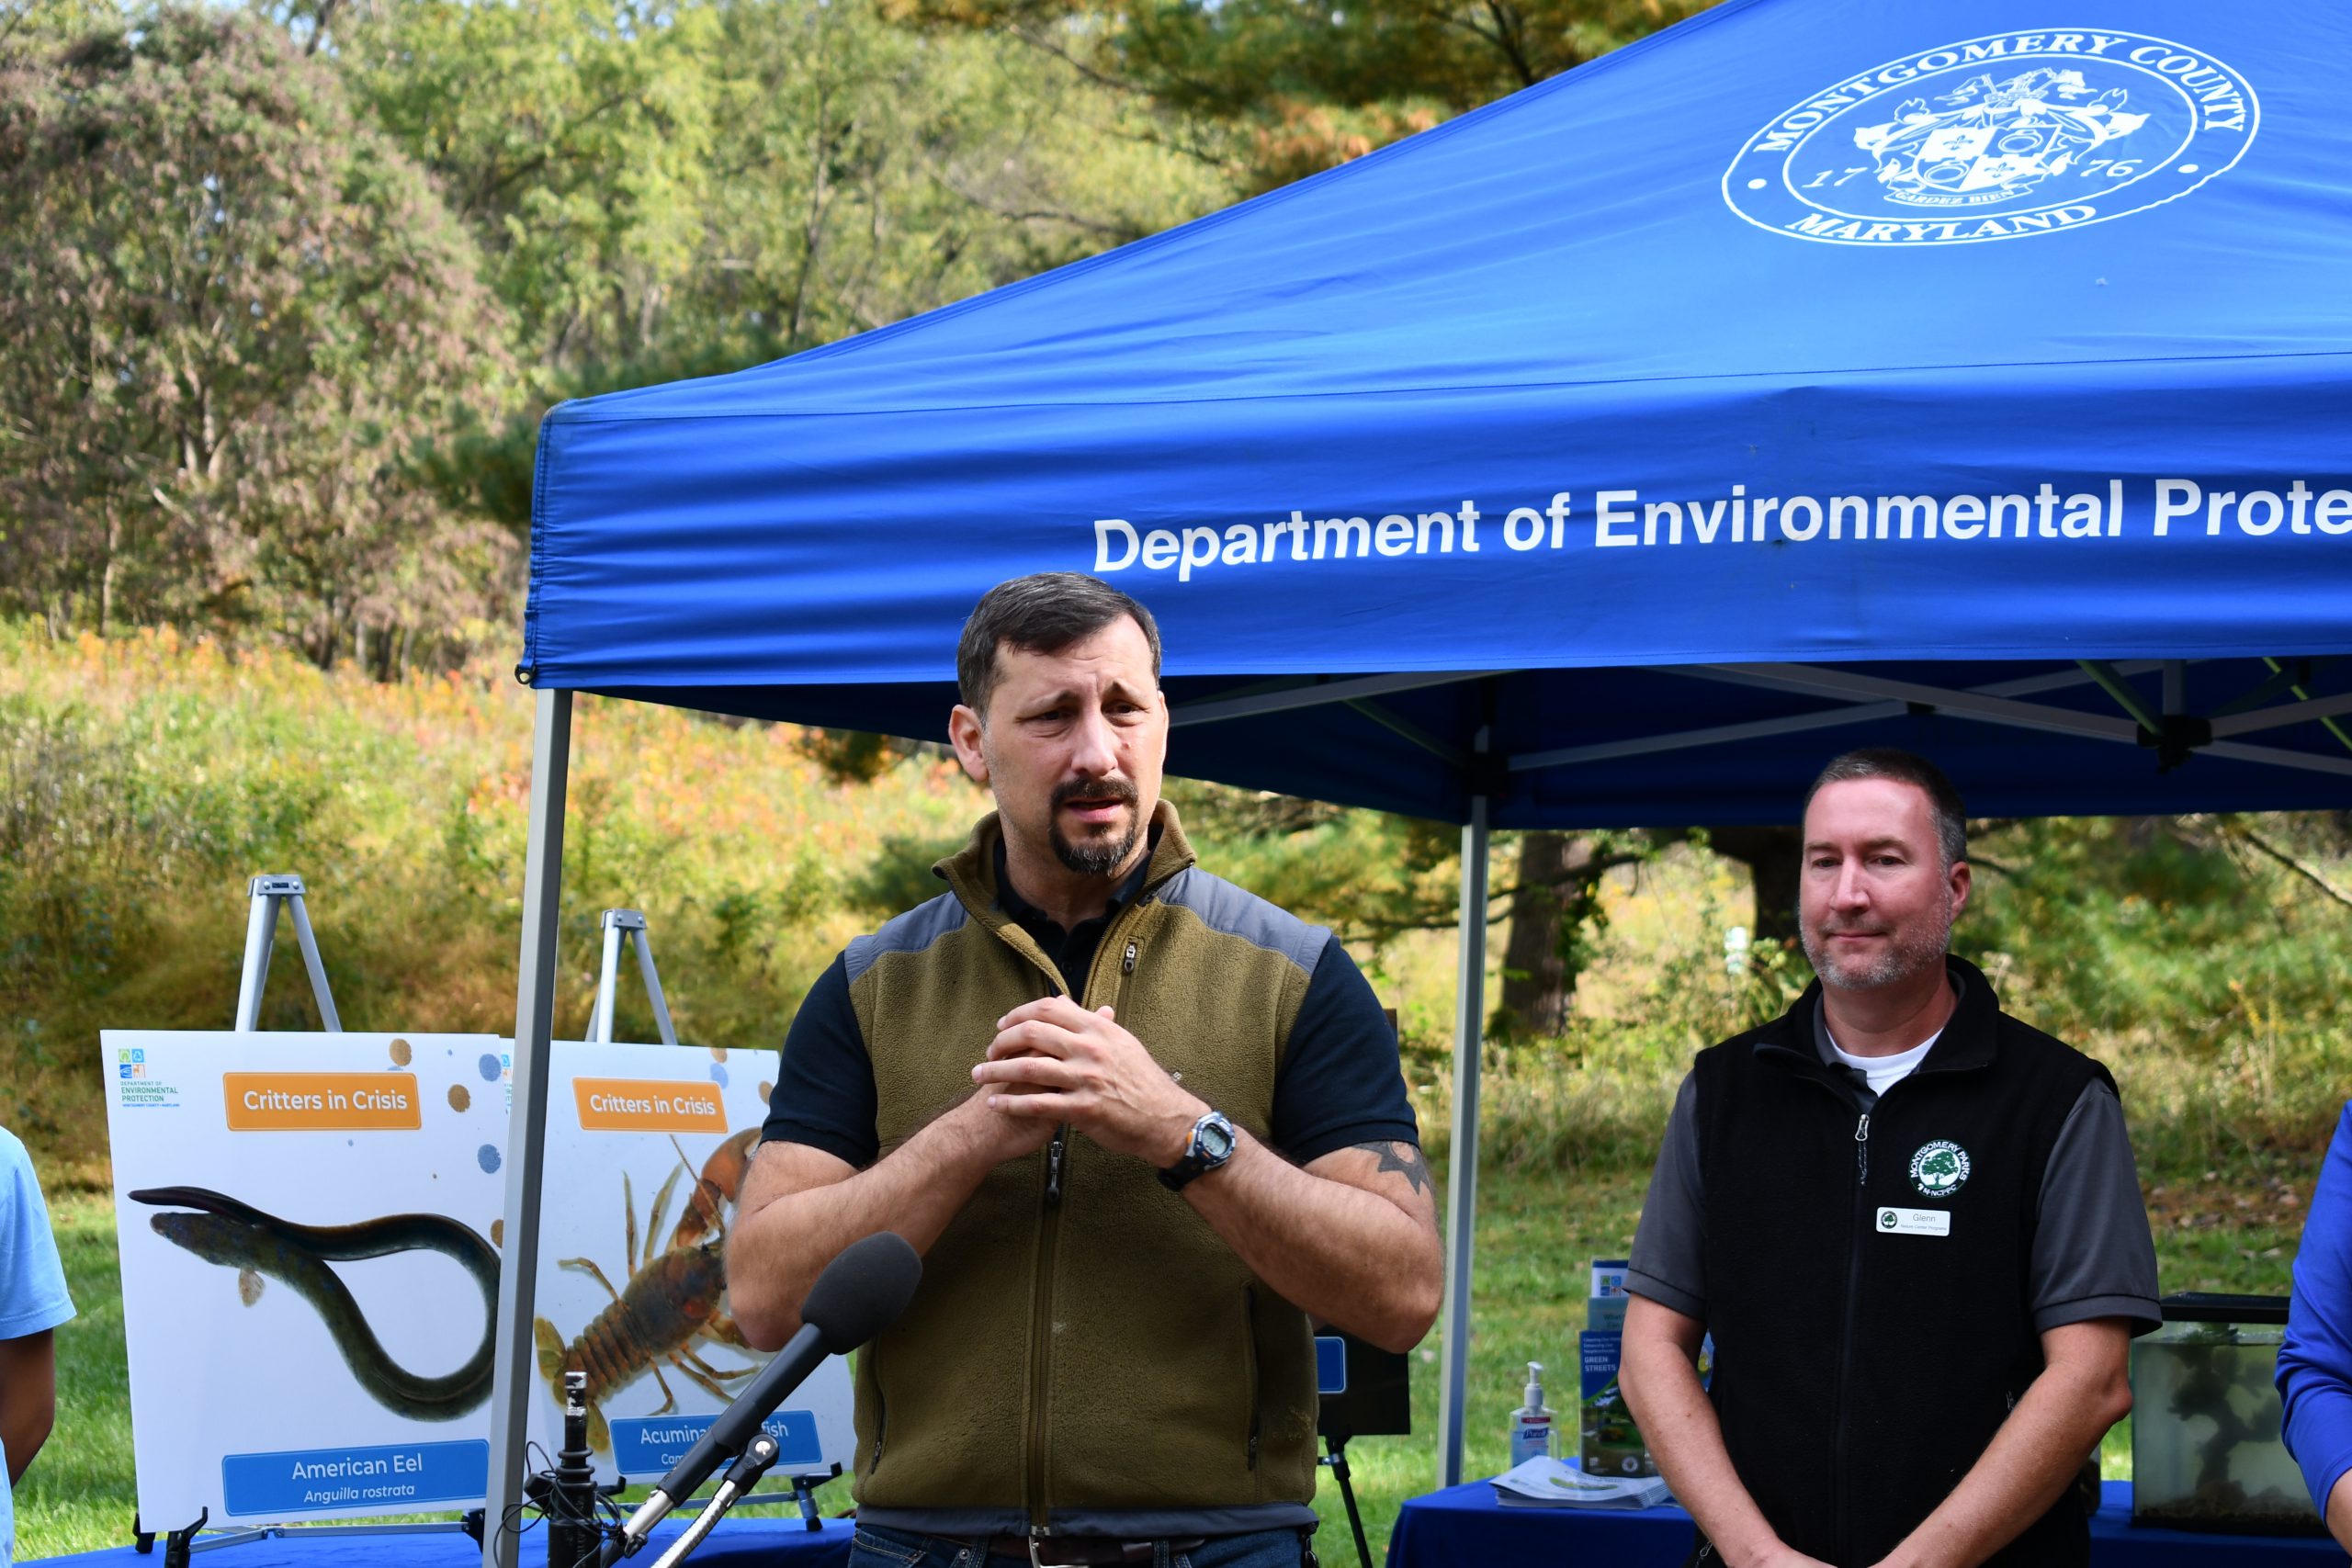 Adam Ortiz speaks at an event hosted by the Department of Environmental Protection.